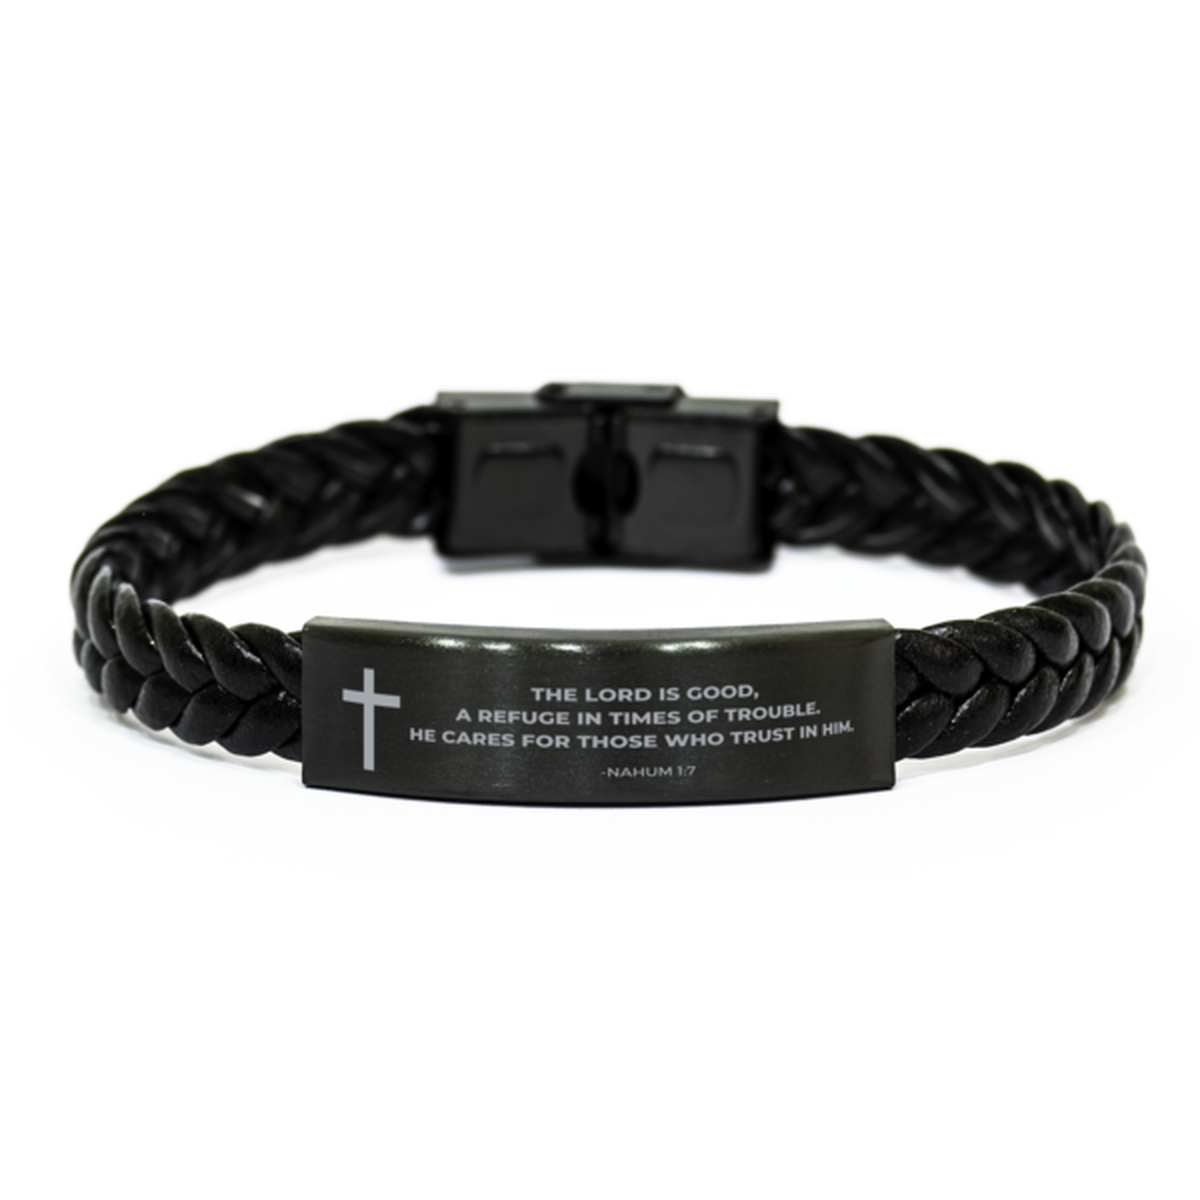 Baptism Gifts For Teenage Boys Girls, Christian Bible Verse Braided Leather Bracelet, The Lord is good, Catholic Confirmation Gifts for Son, Godson, Grandson, Nephew